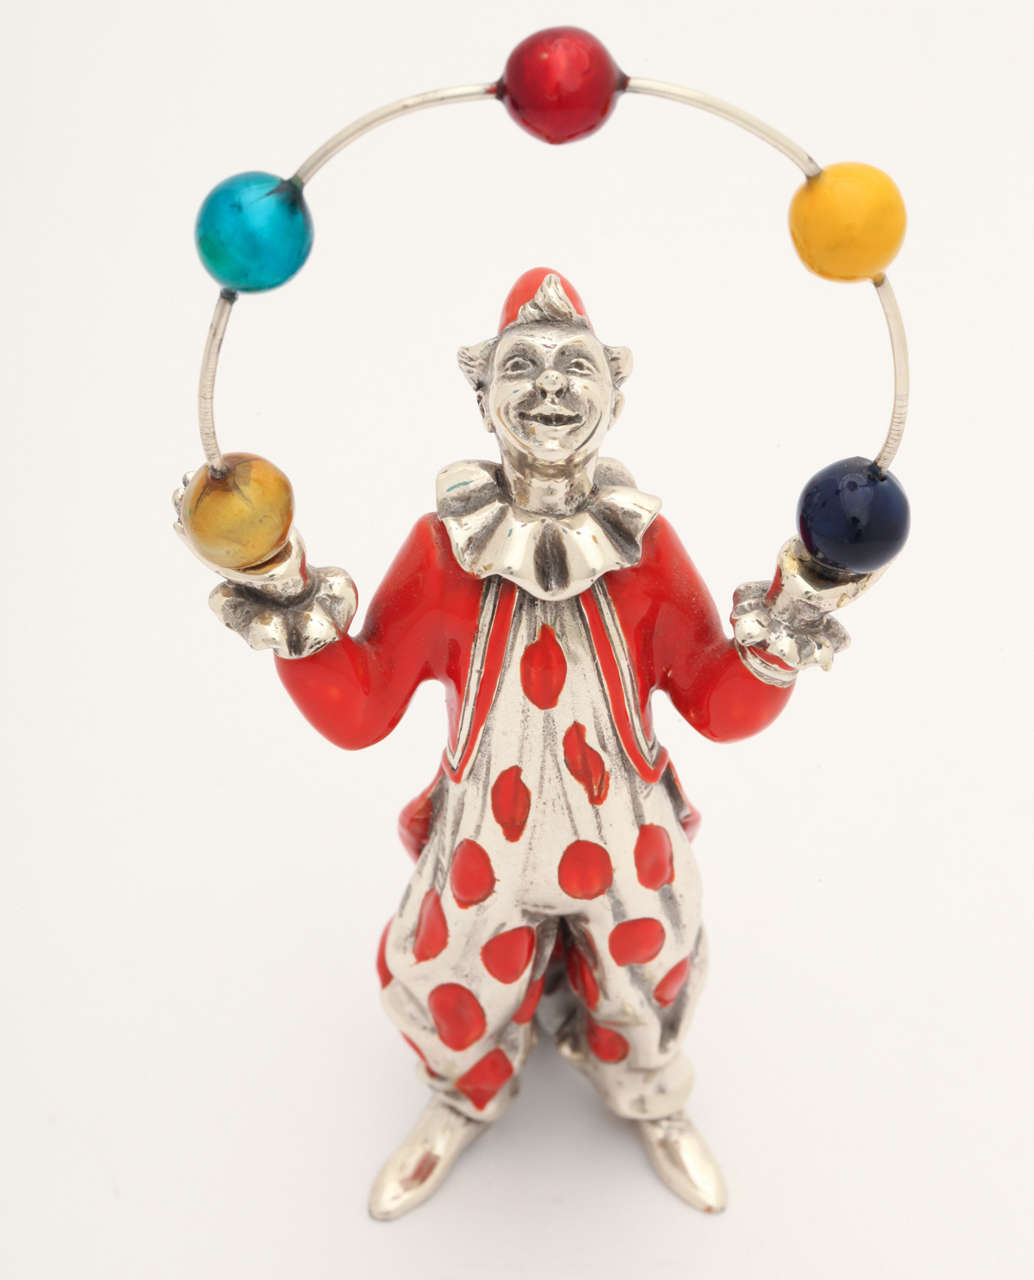 Whimsical polychrome sterling figurine of a juggling clown. Created by Gene Moore in the 1960's USA.

2